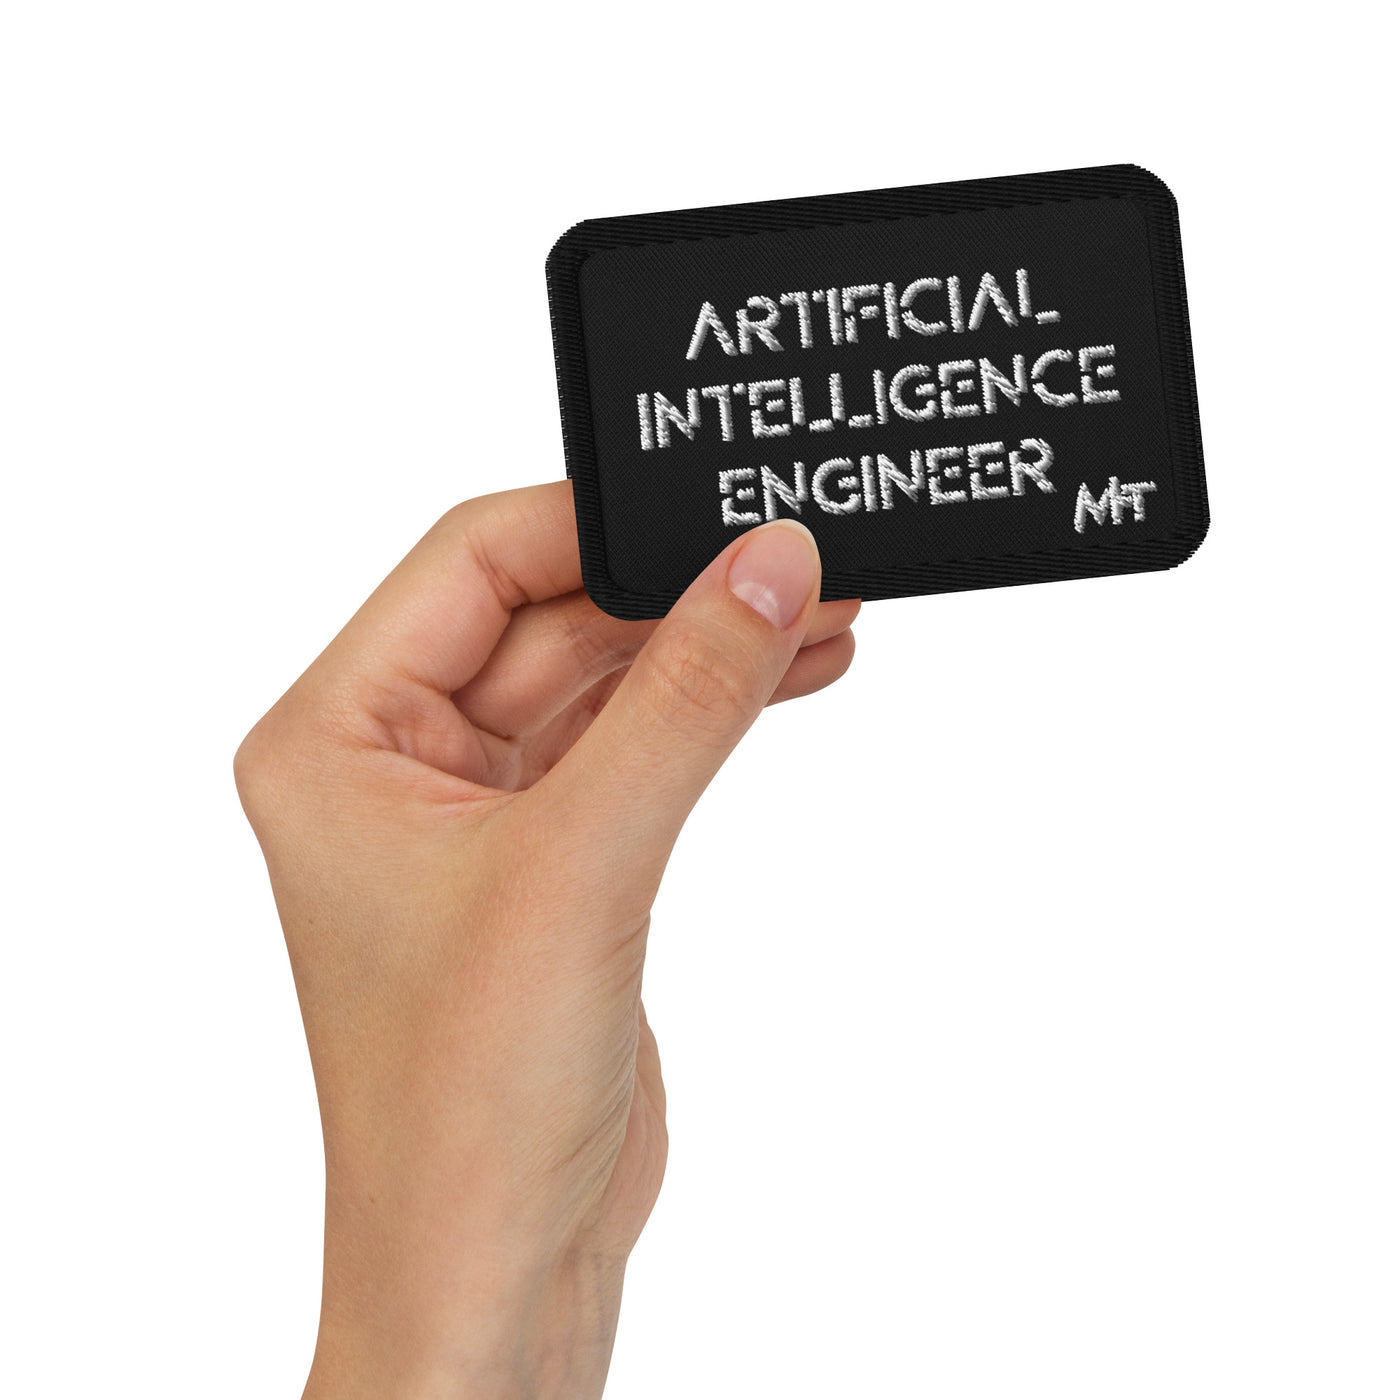 Artificial intelligence engineer - Embroidered patches